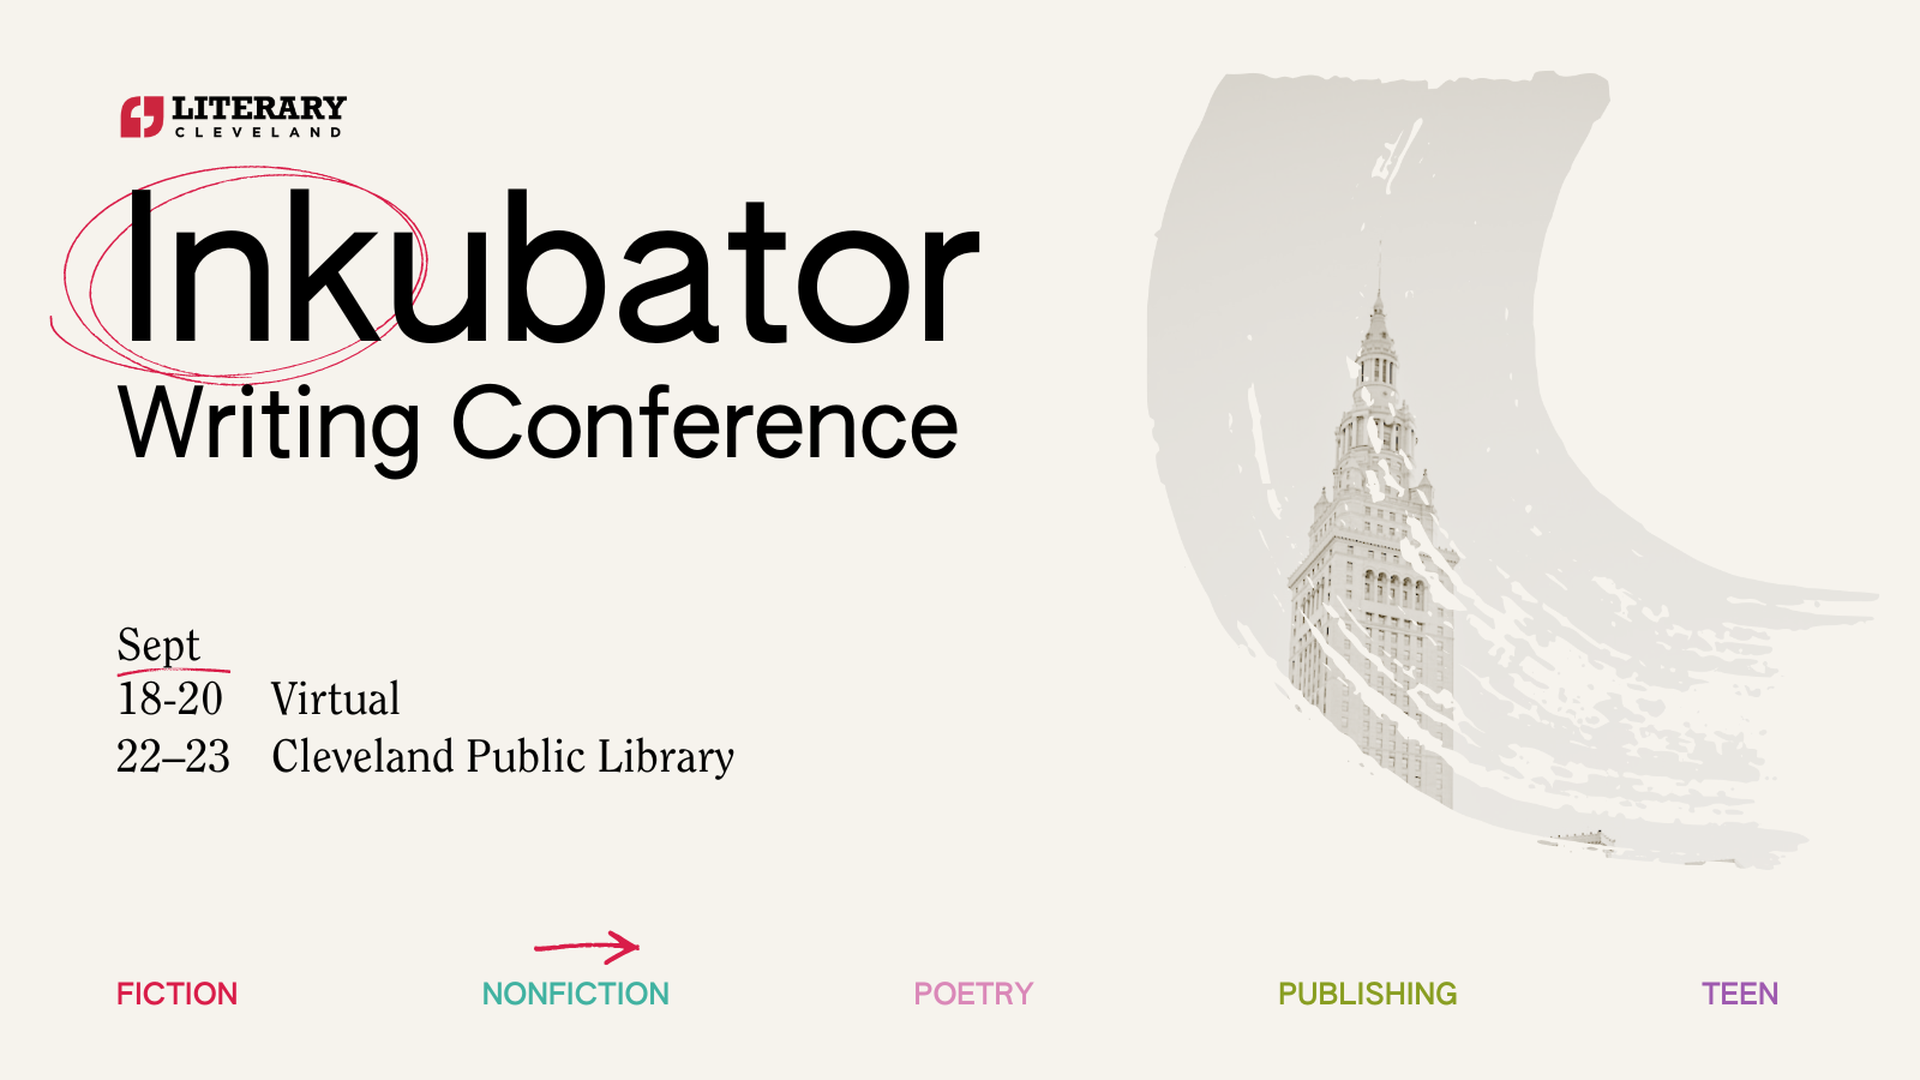 A promotional flyer for the Inkubator Writing Conference in Cleveland 